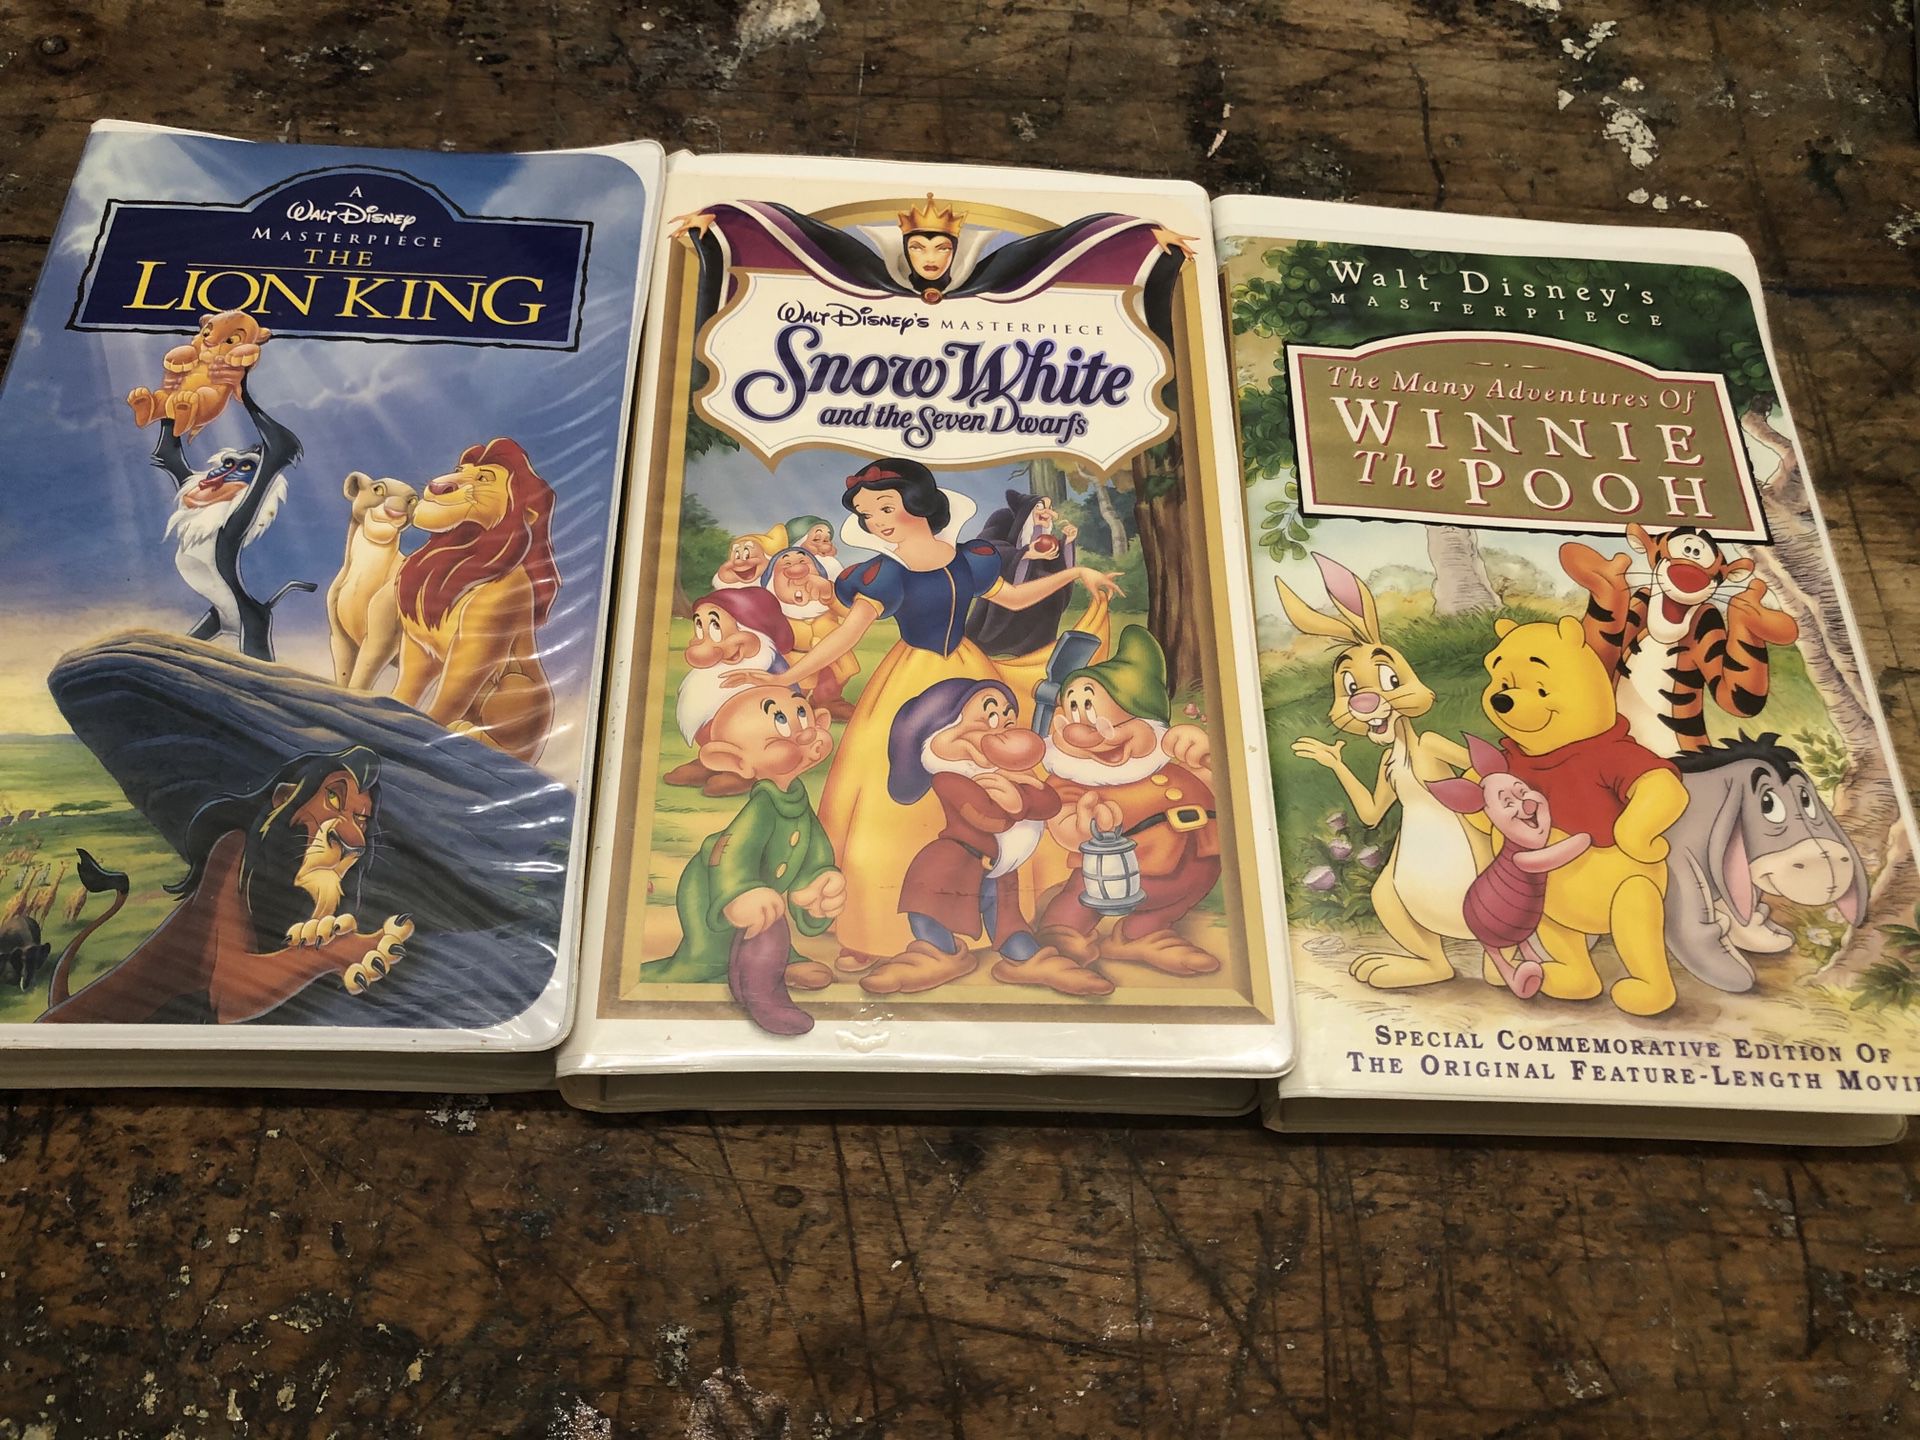 3 Disney Masterpiece VHS tapes